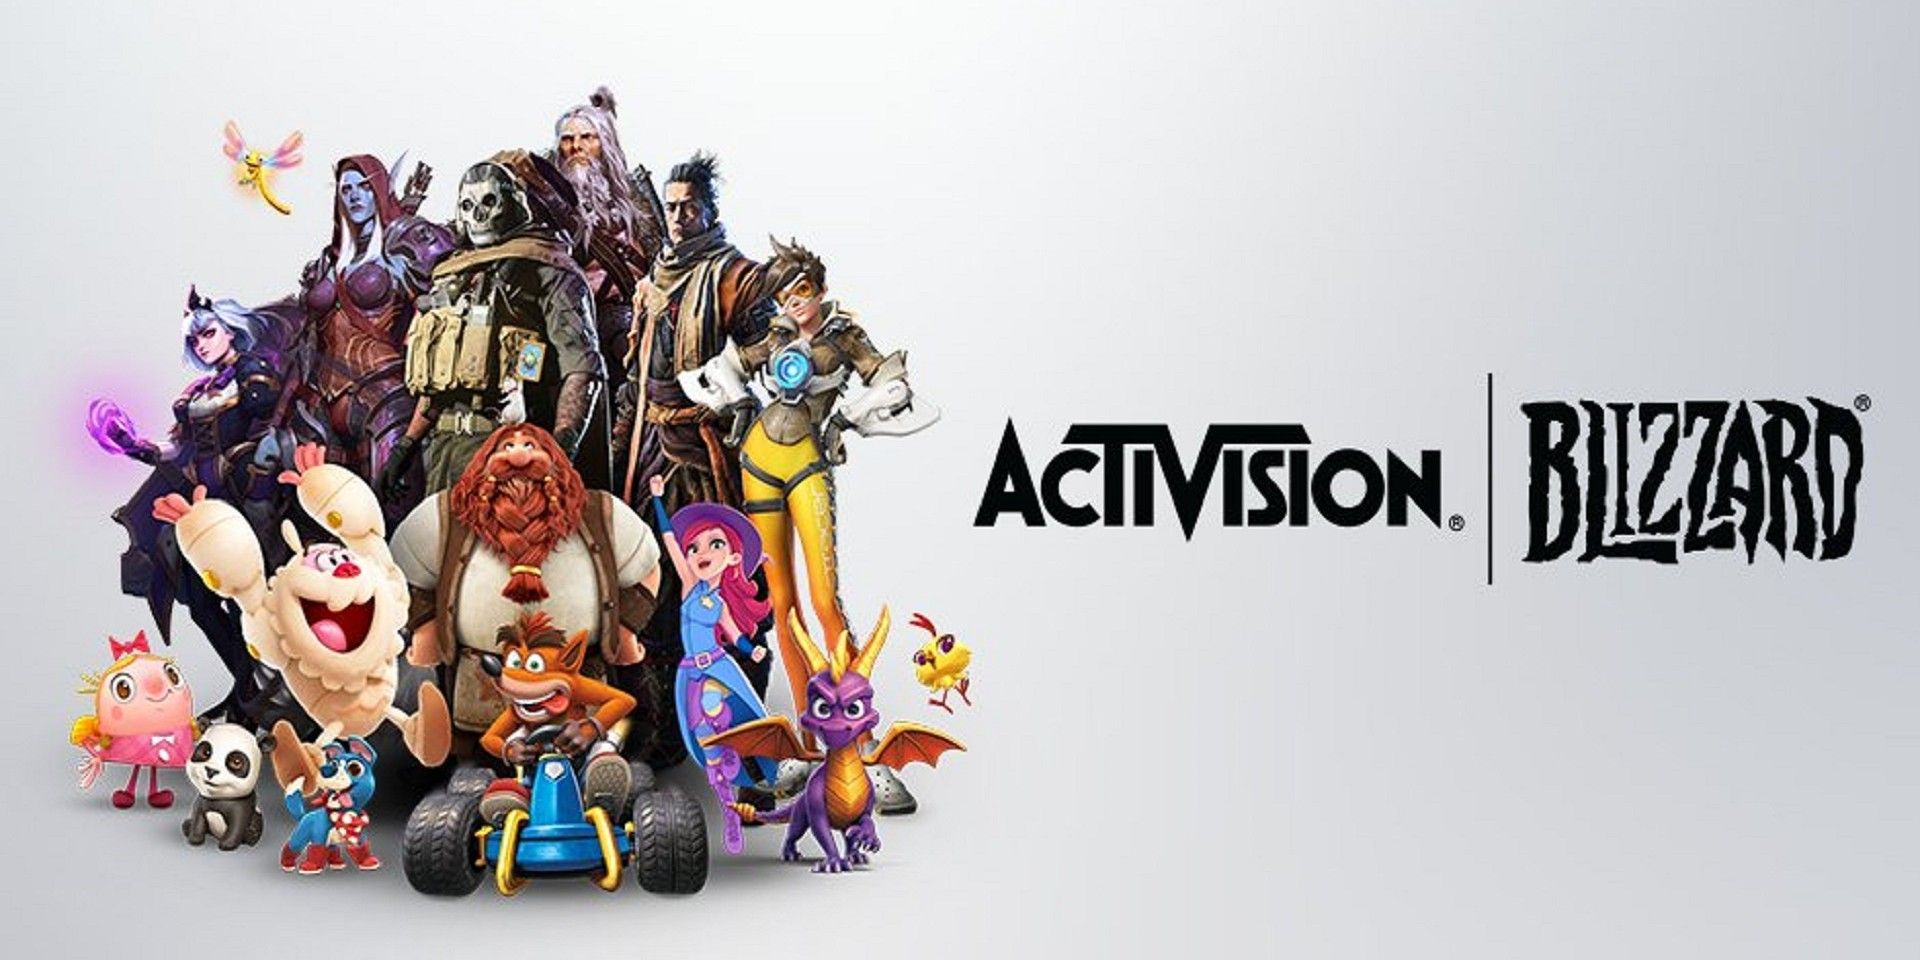 Activision Blizzard Logo with Owned IP characters